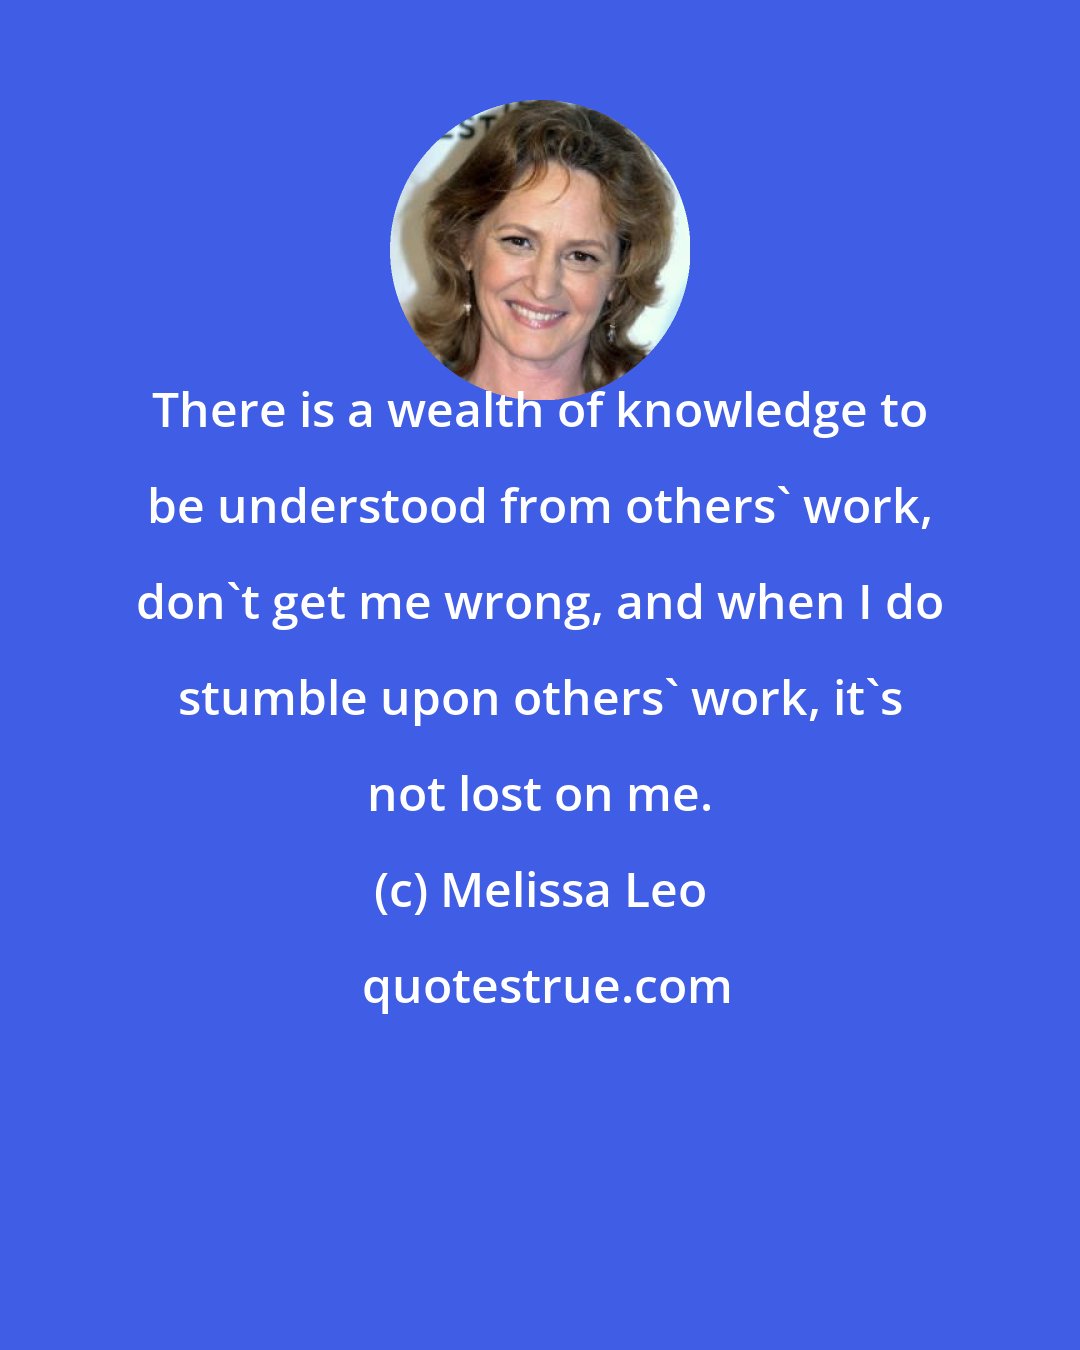 Melissa Leo: There is a wealth of knowledge to be understood from others' work, don't get me wrong, and when I do stumble upon others' work, it's not lost on me.